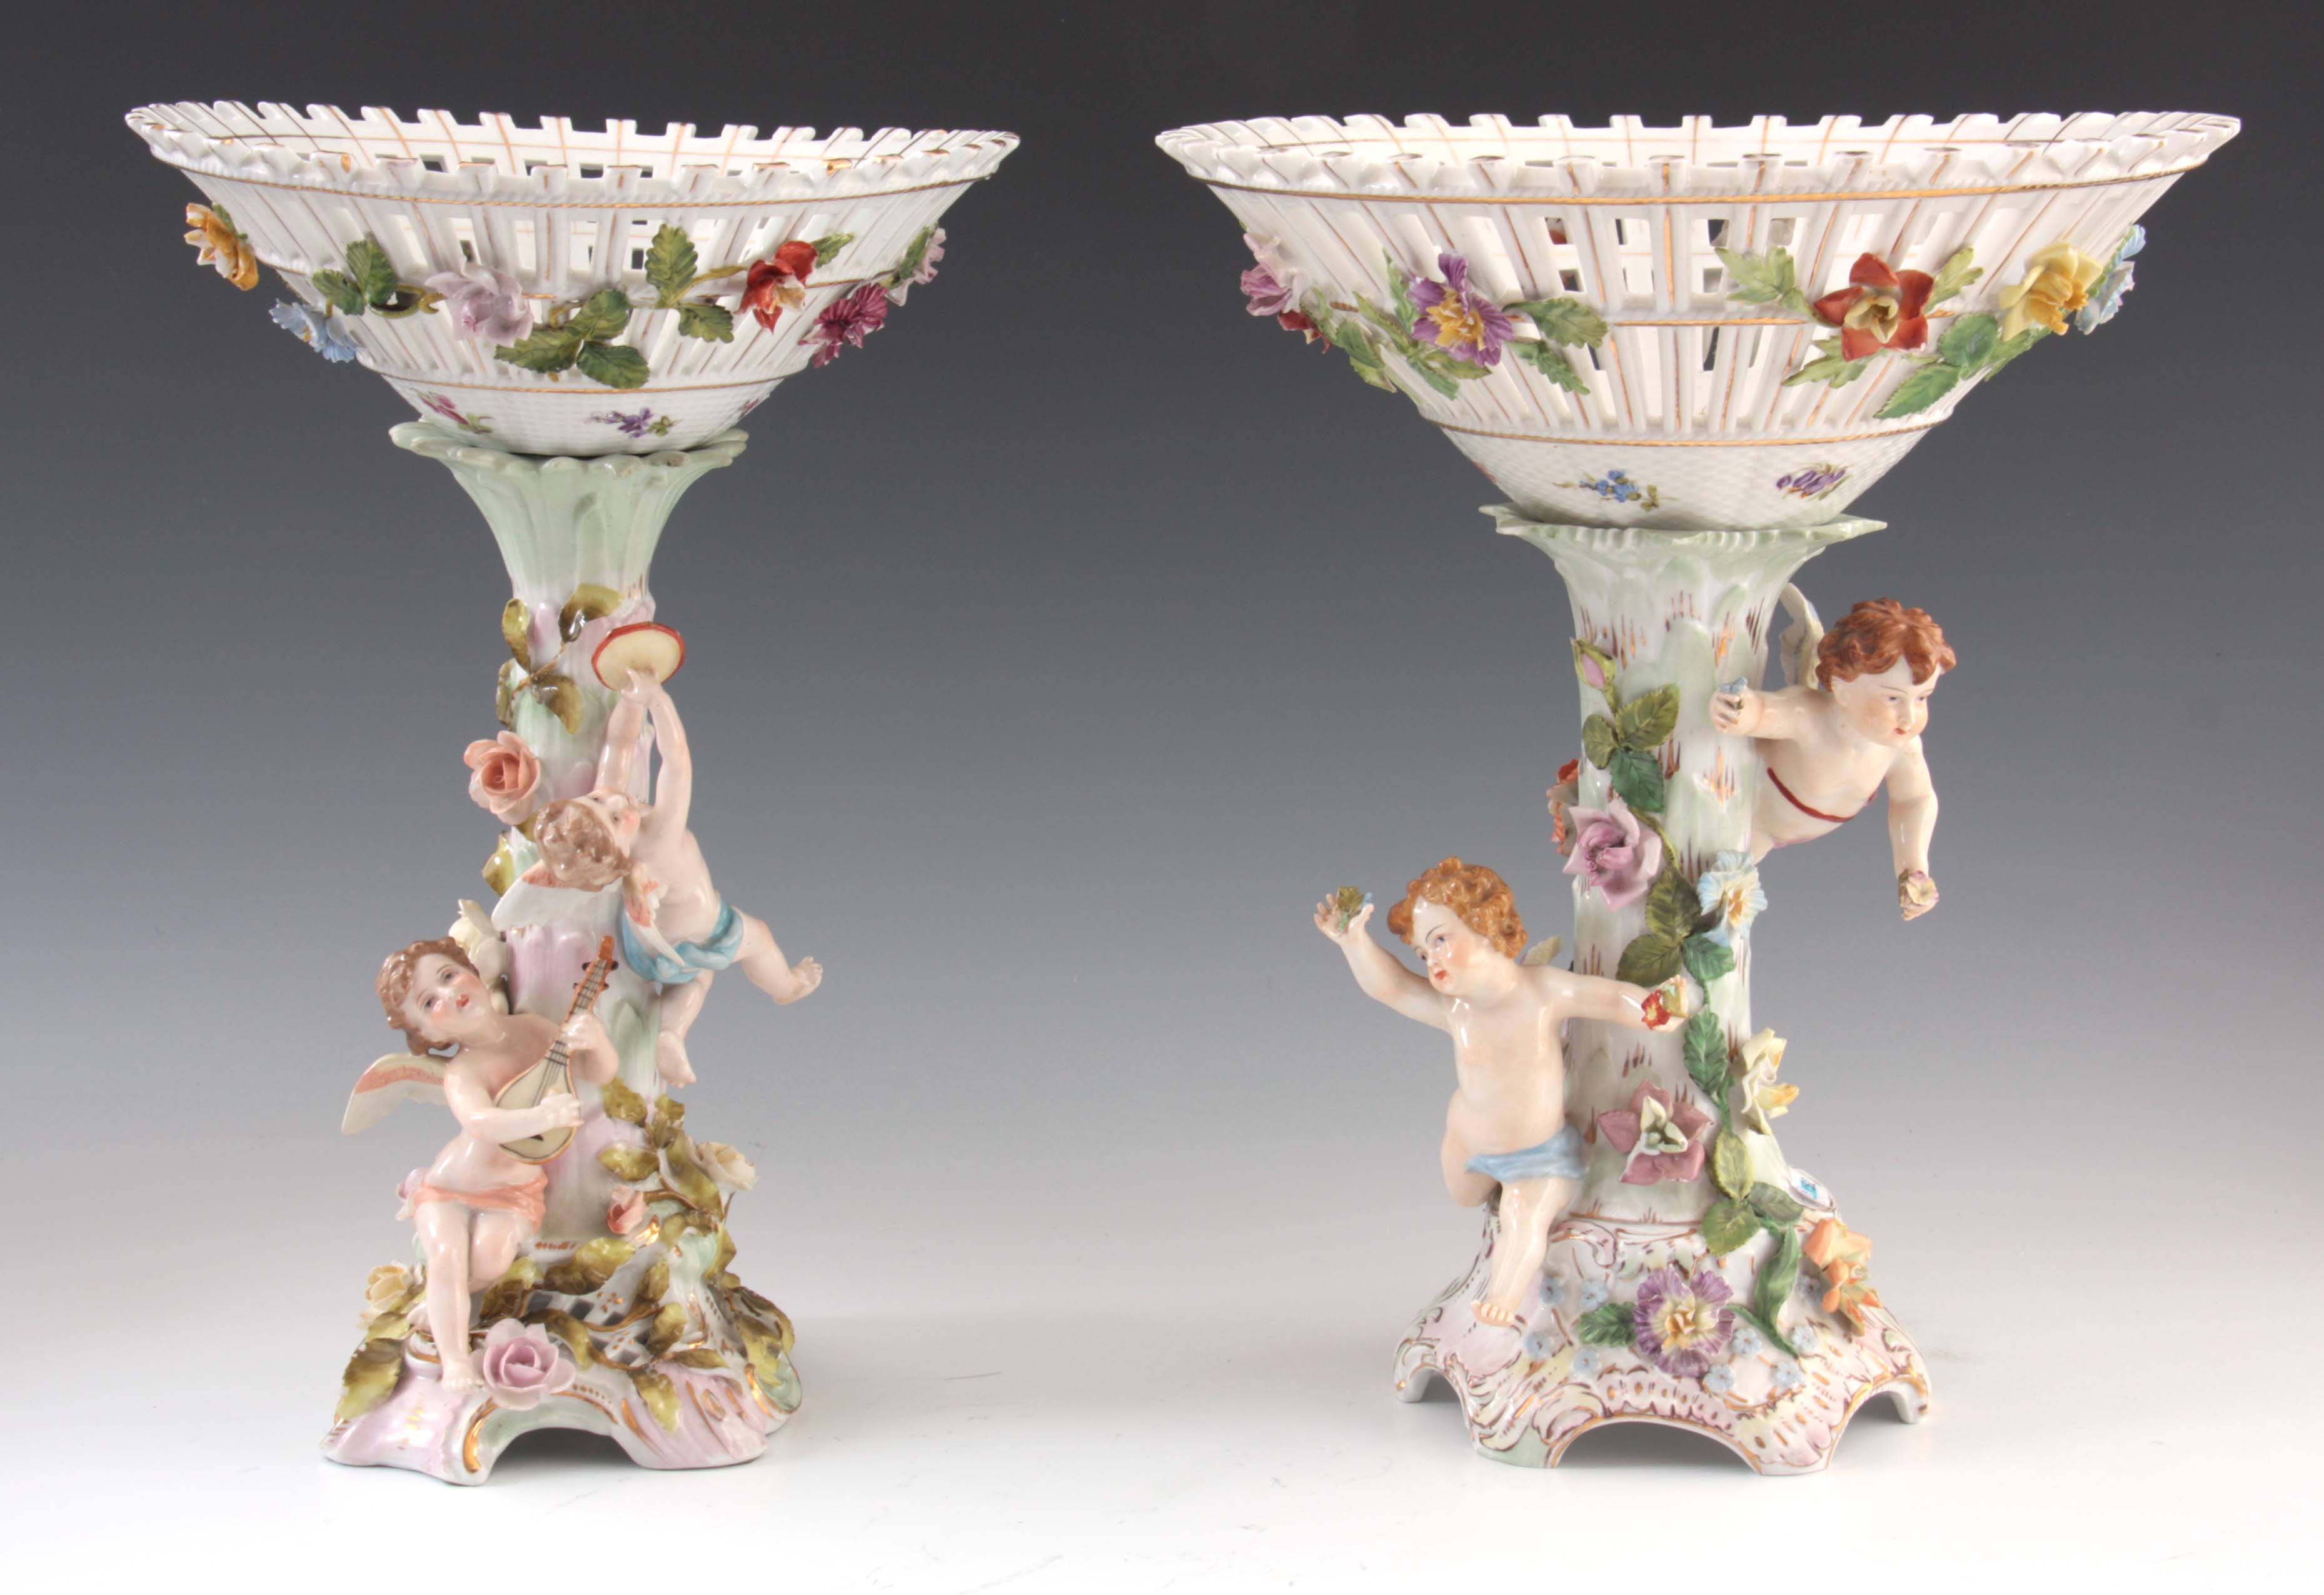 TWO 19TH CENTURY DRESDEN PORCELAIN COMPOTE CENTREPIECES with figural cherub bases and pierced basket